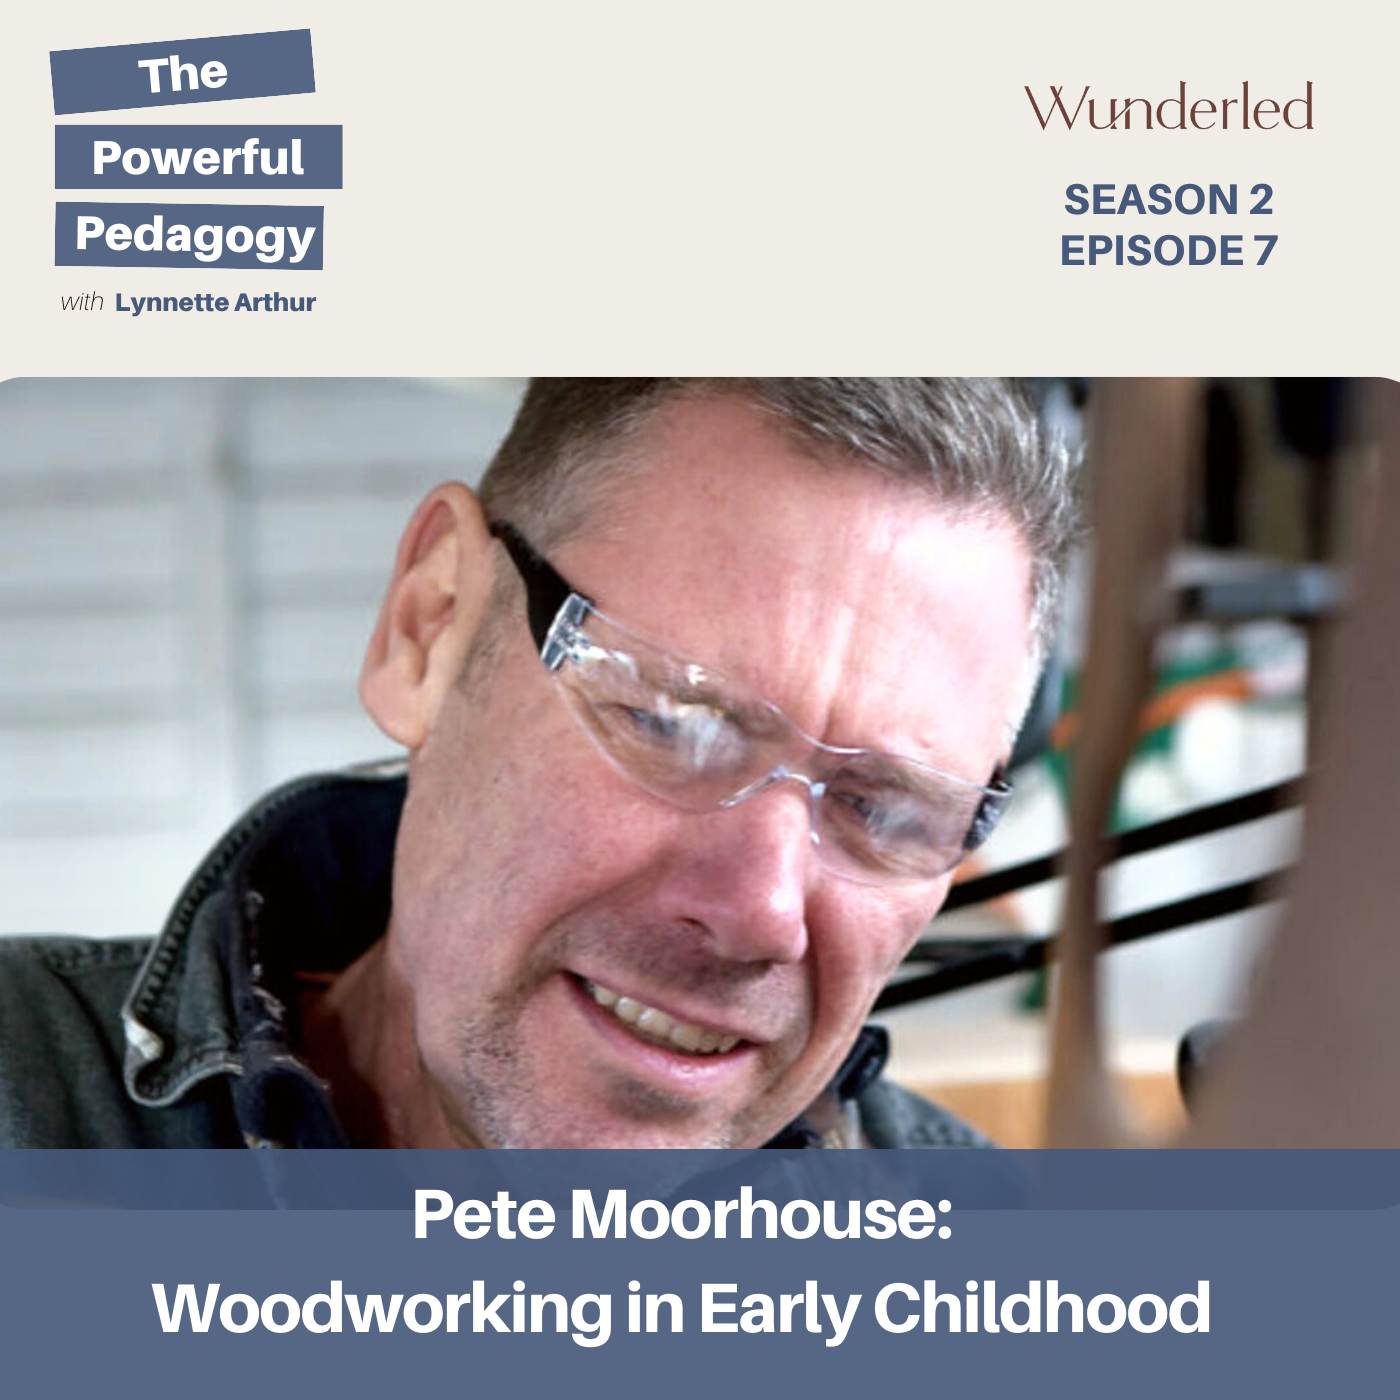 Pete Moorhouse: Woodworking in Early Childhood